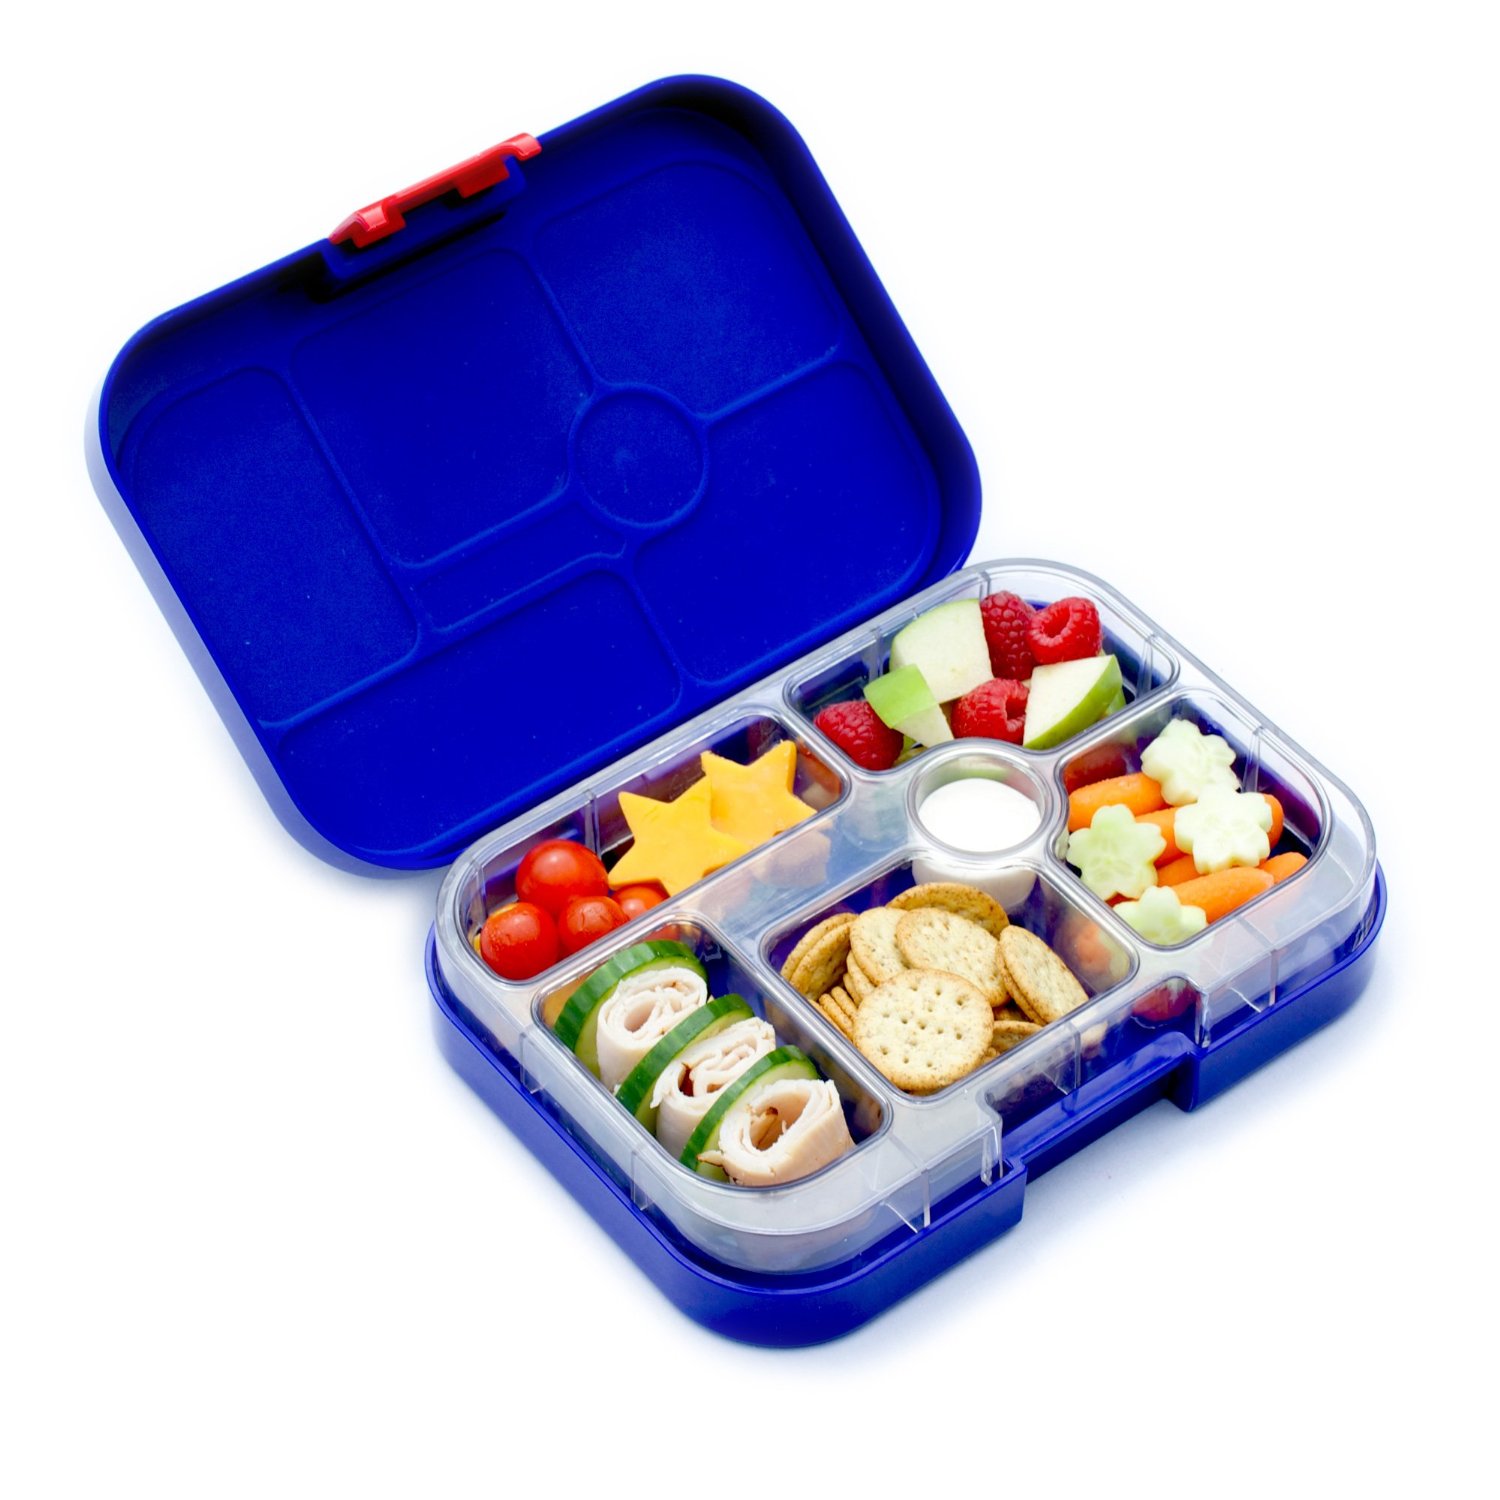 Make sure to choose the perfect lunchbox! It needs to be well-insulated and leak-proof.